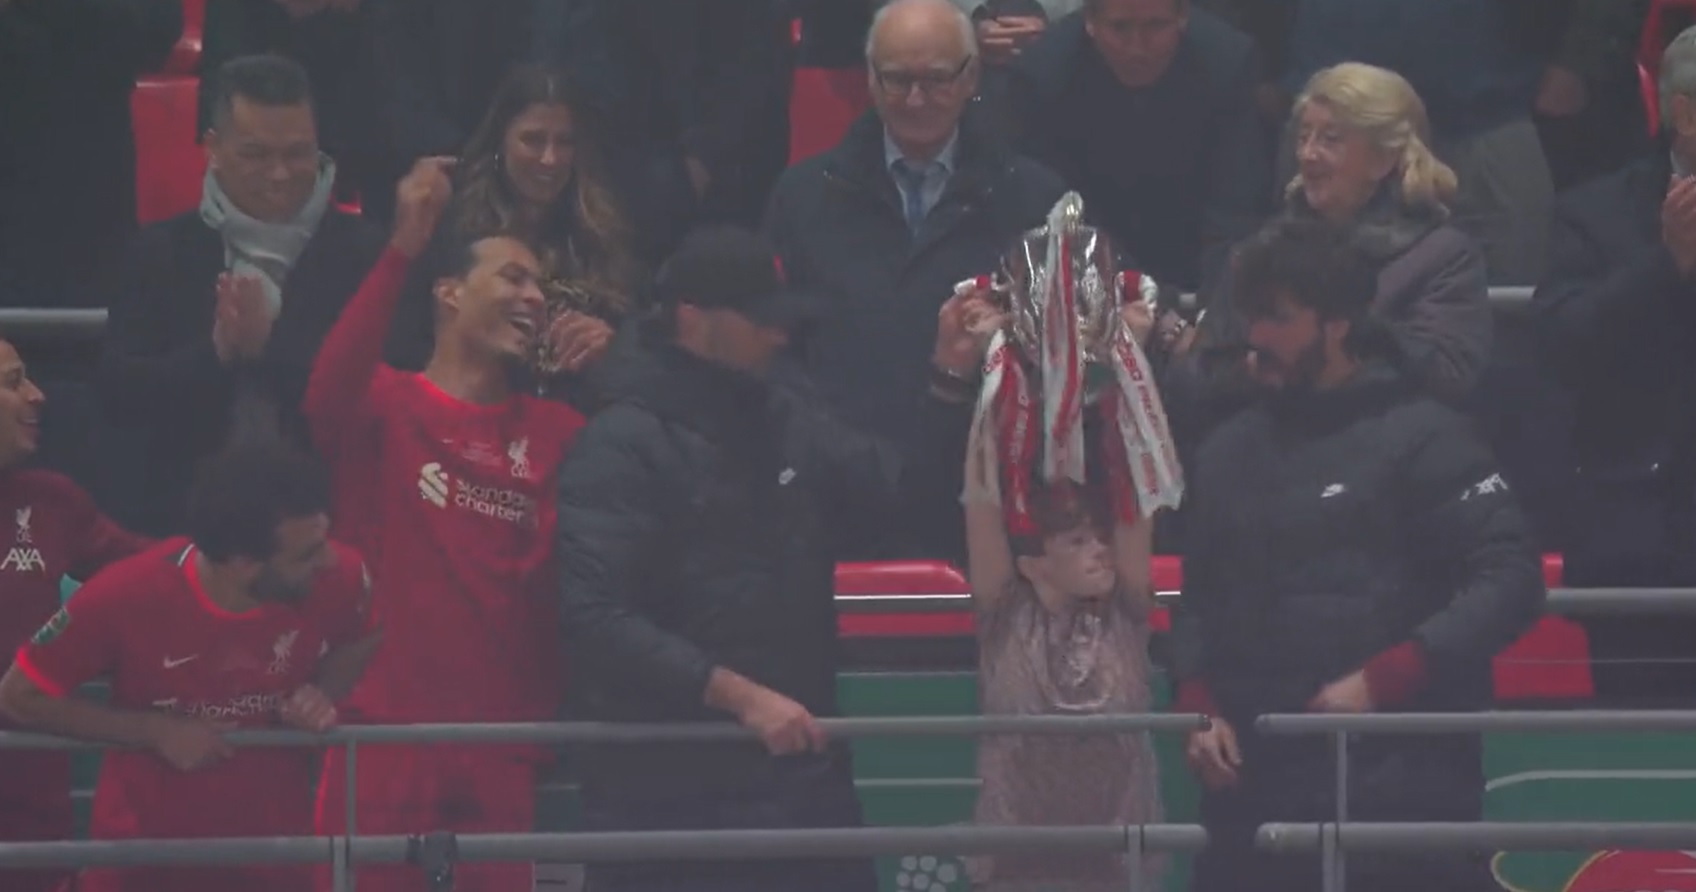 (Video) Brilliant moment Klopp shares trophy lift moment with young Liverpool fan